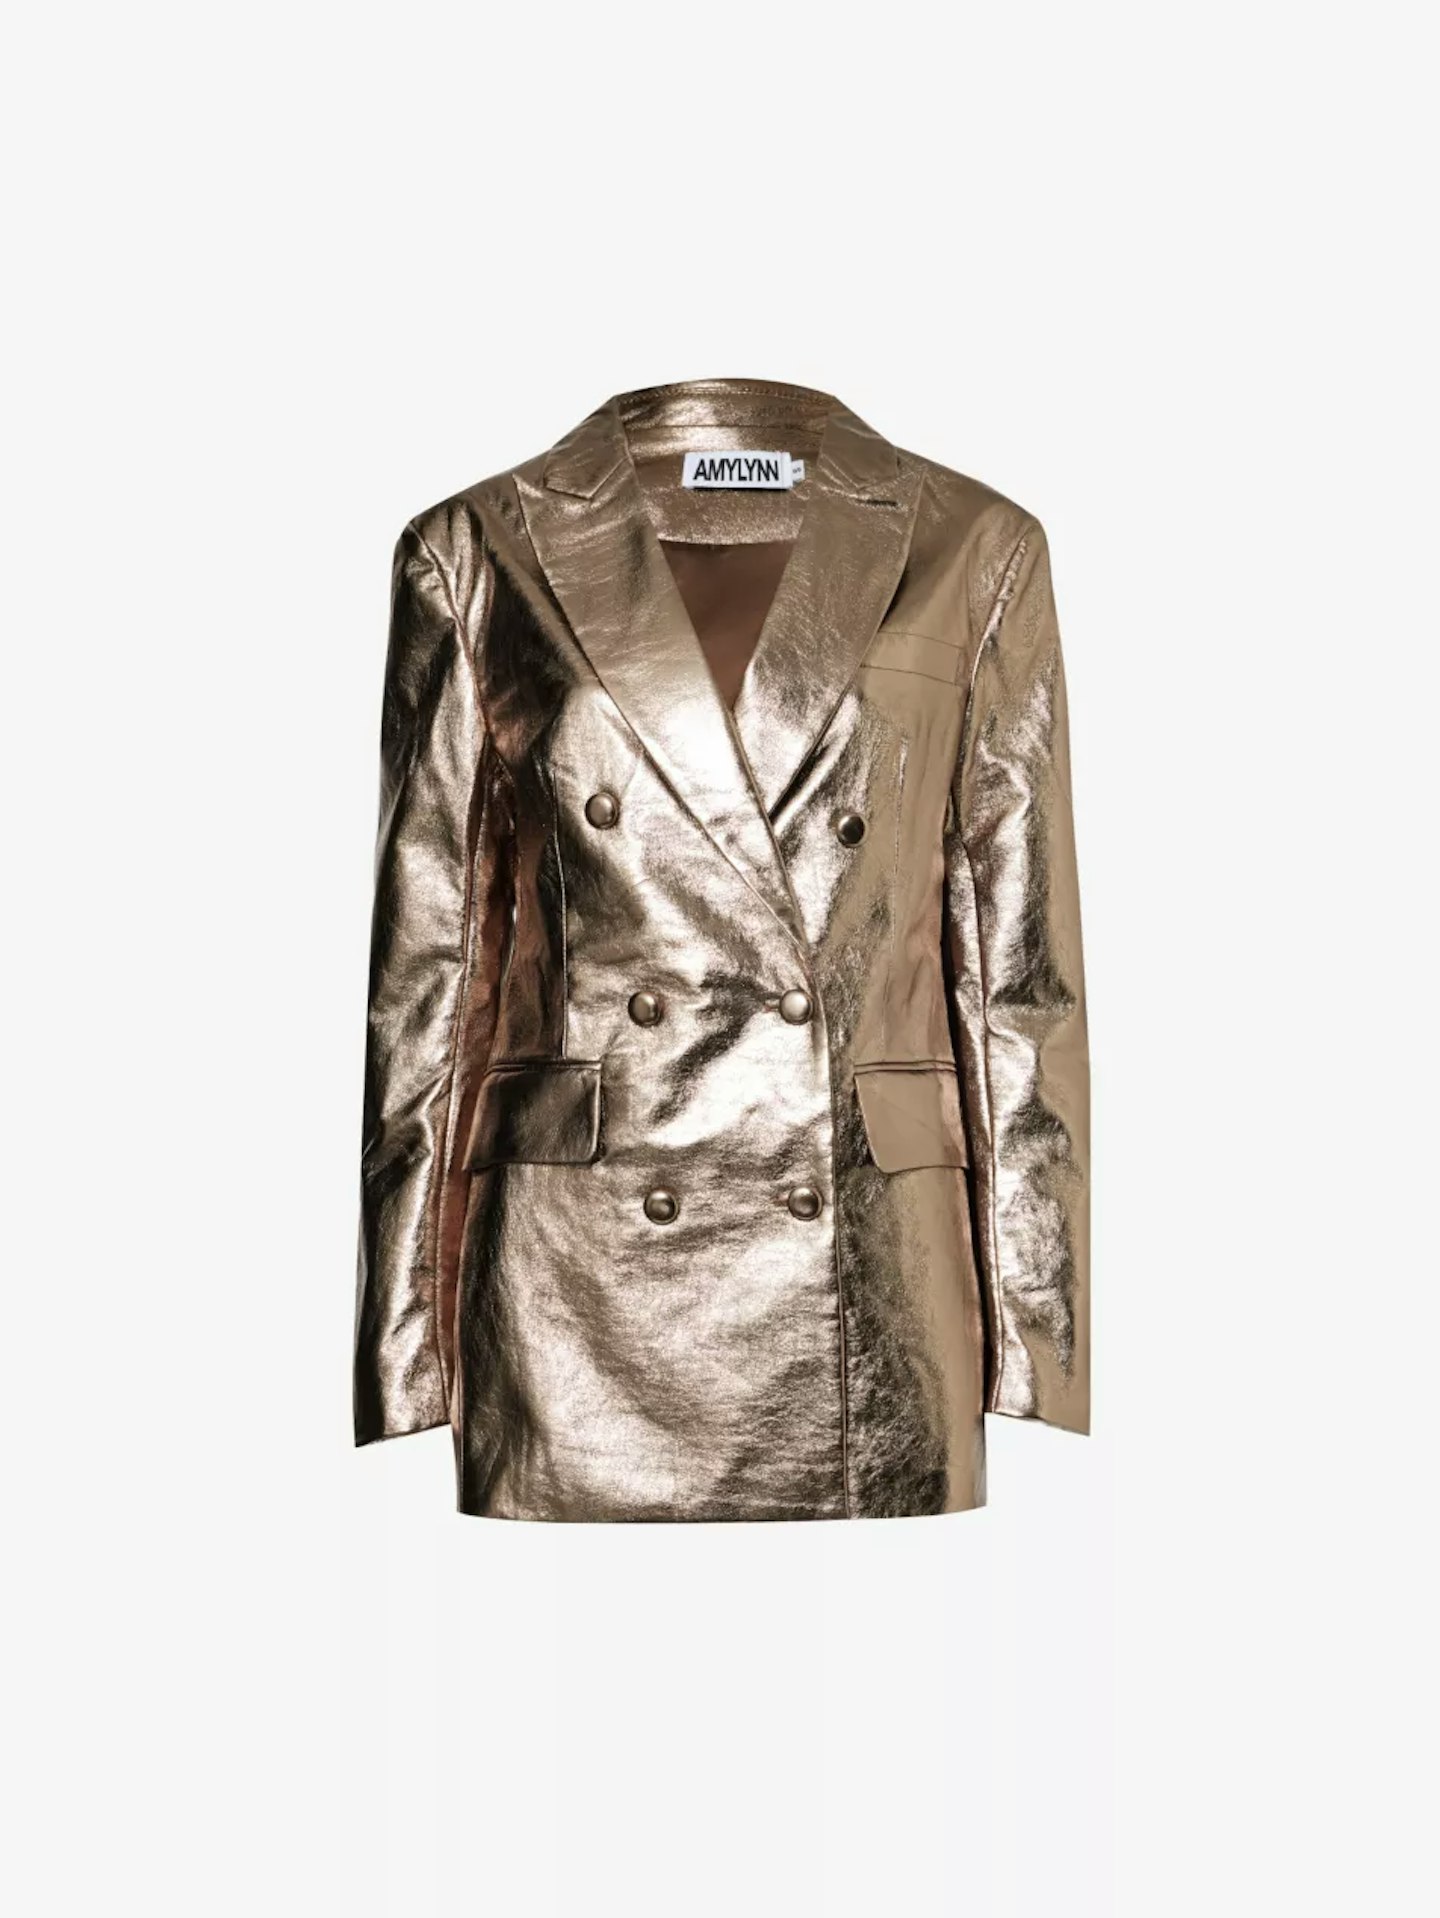 Amy Lynn Metallic Double-Breasted Faux-Leather Jacket